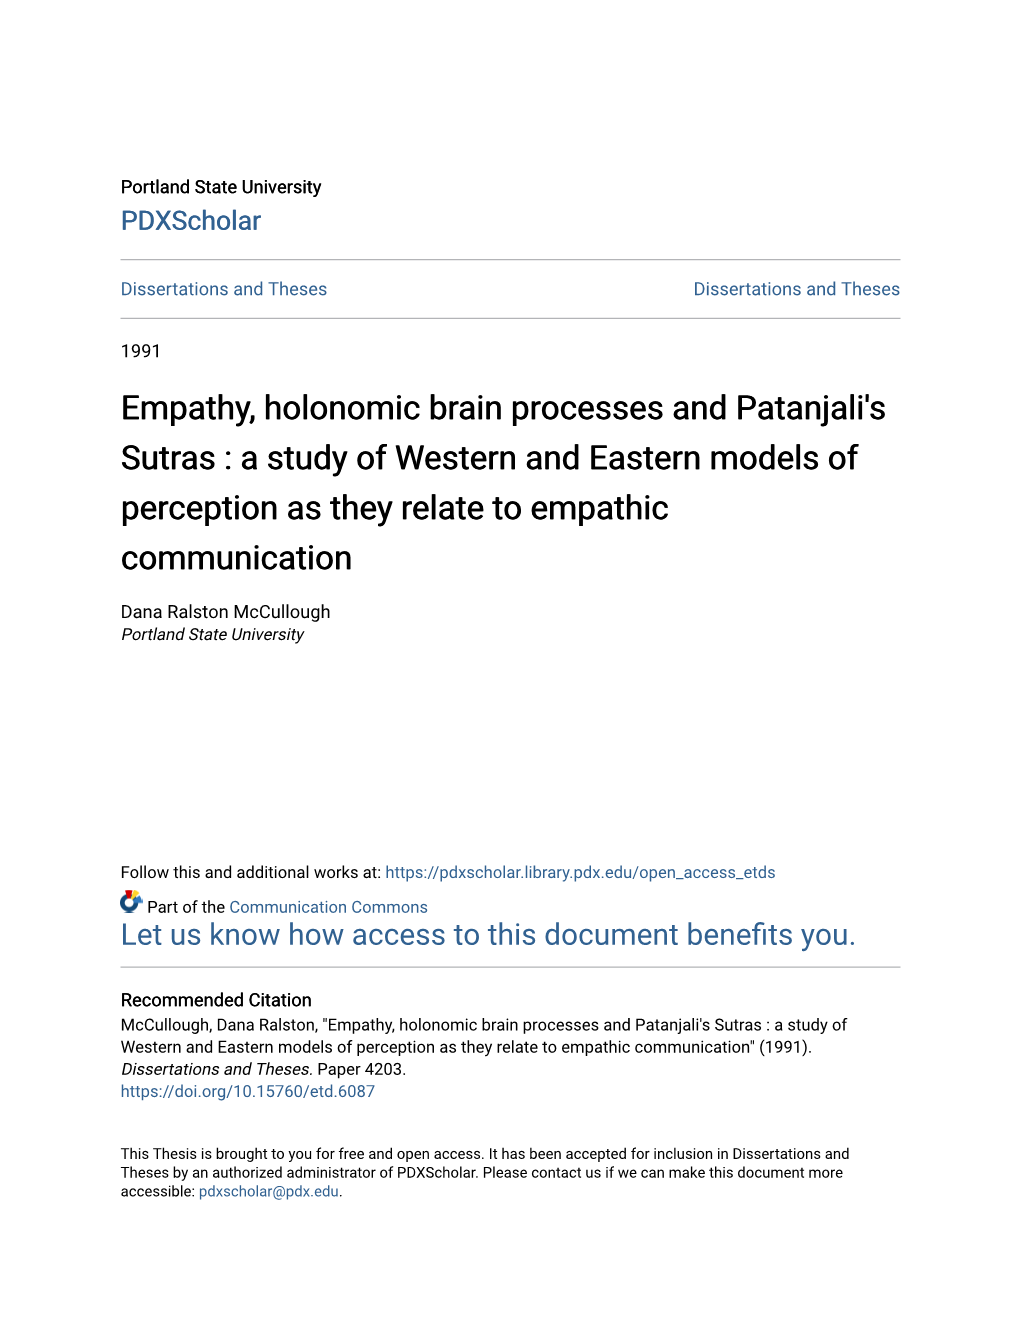 Empathy, Holonomic Brain Processes and Patanjali's Sutras : a Study of Western and Eastern Models of Perception As They Relate to Empathic Communication